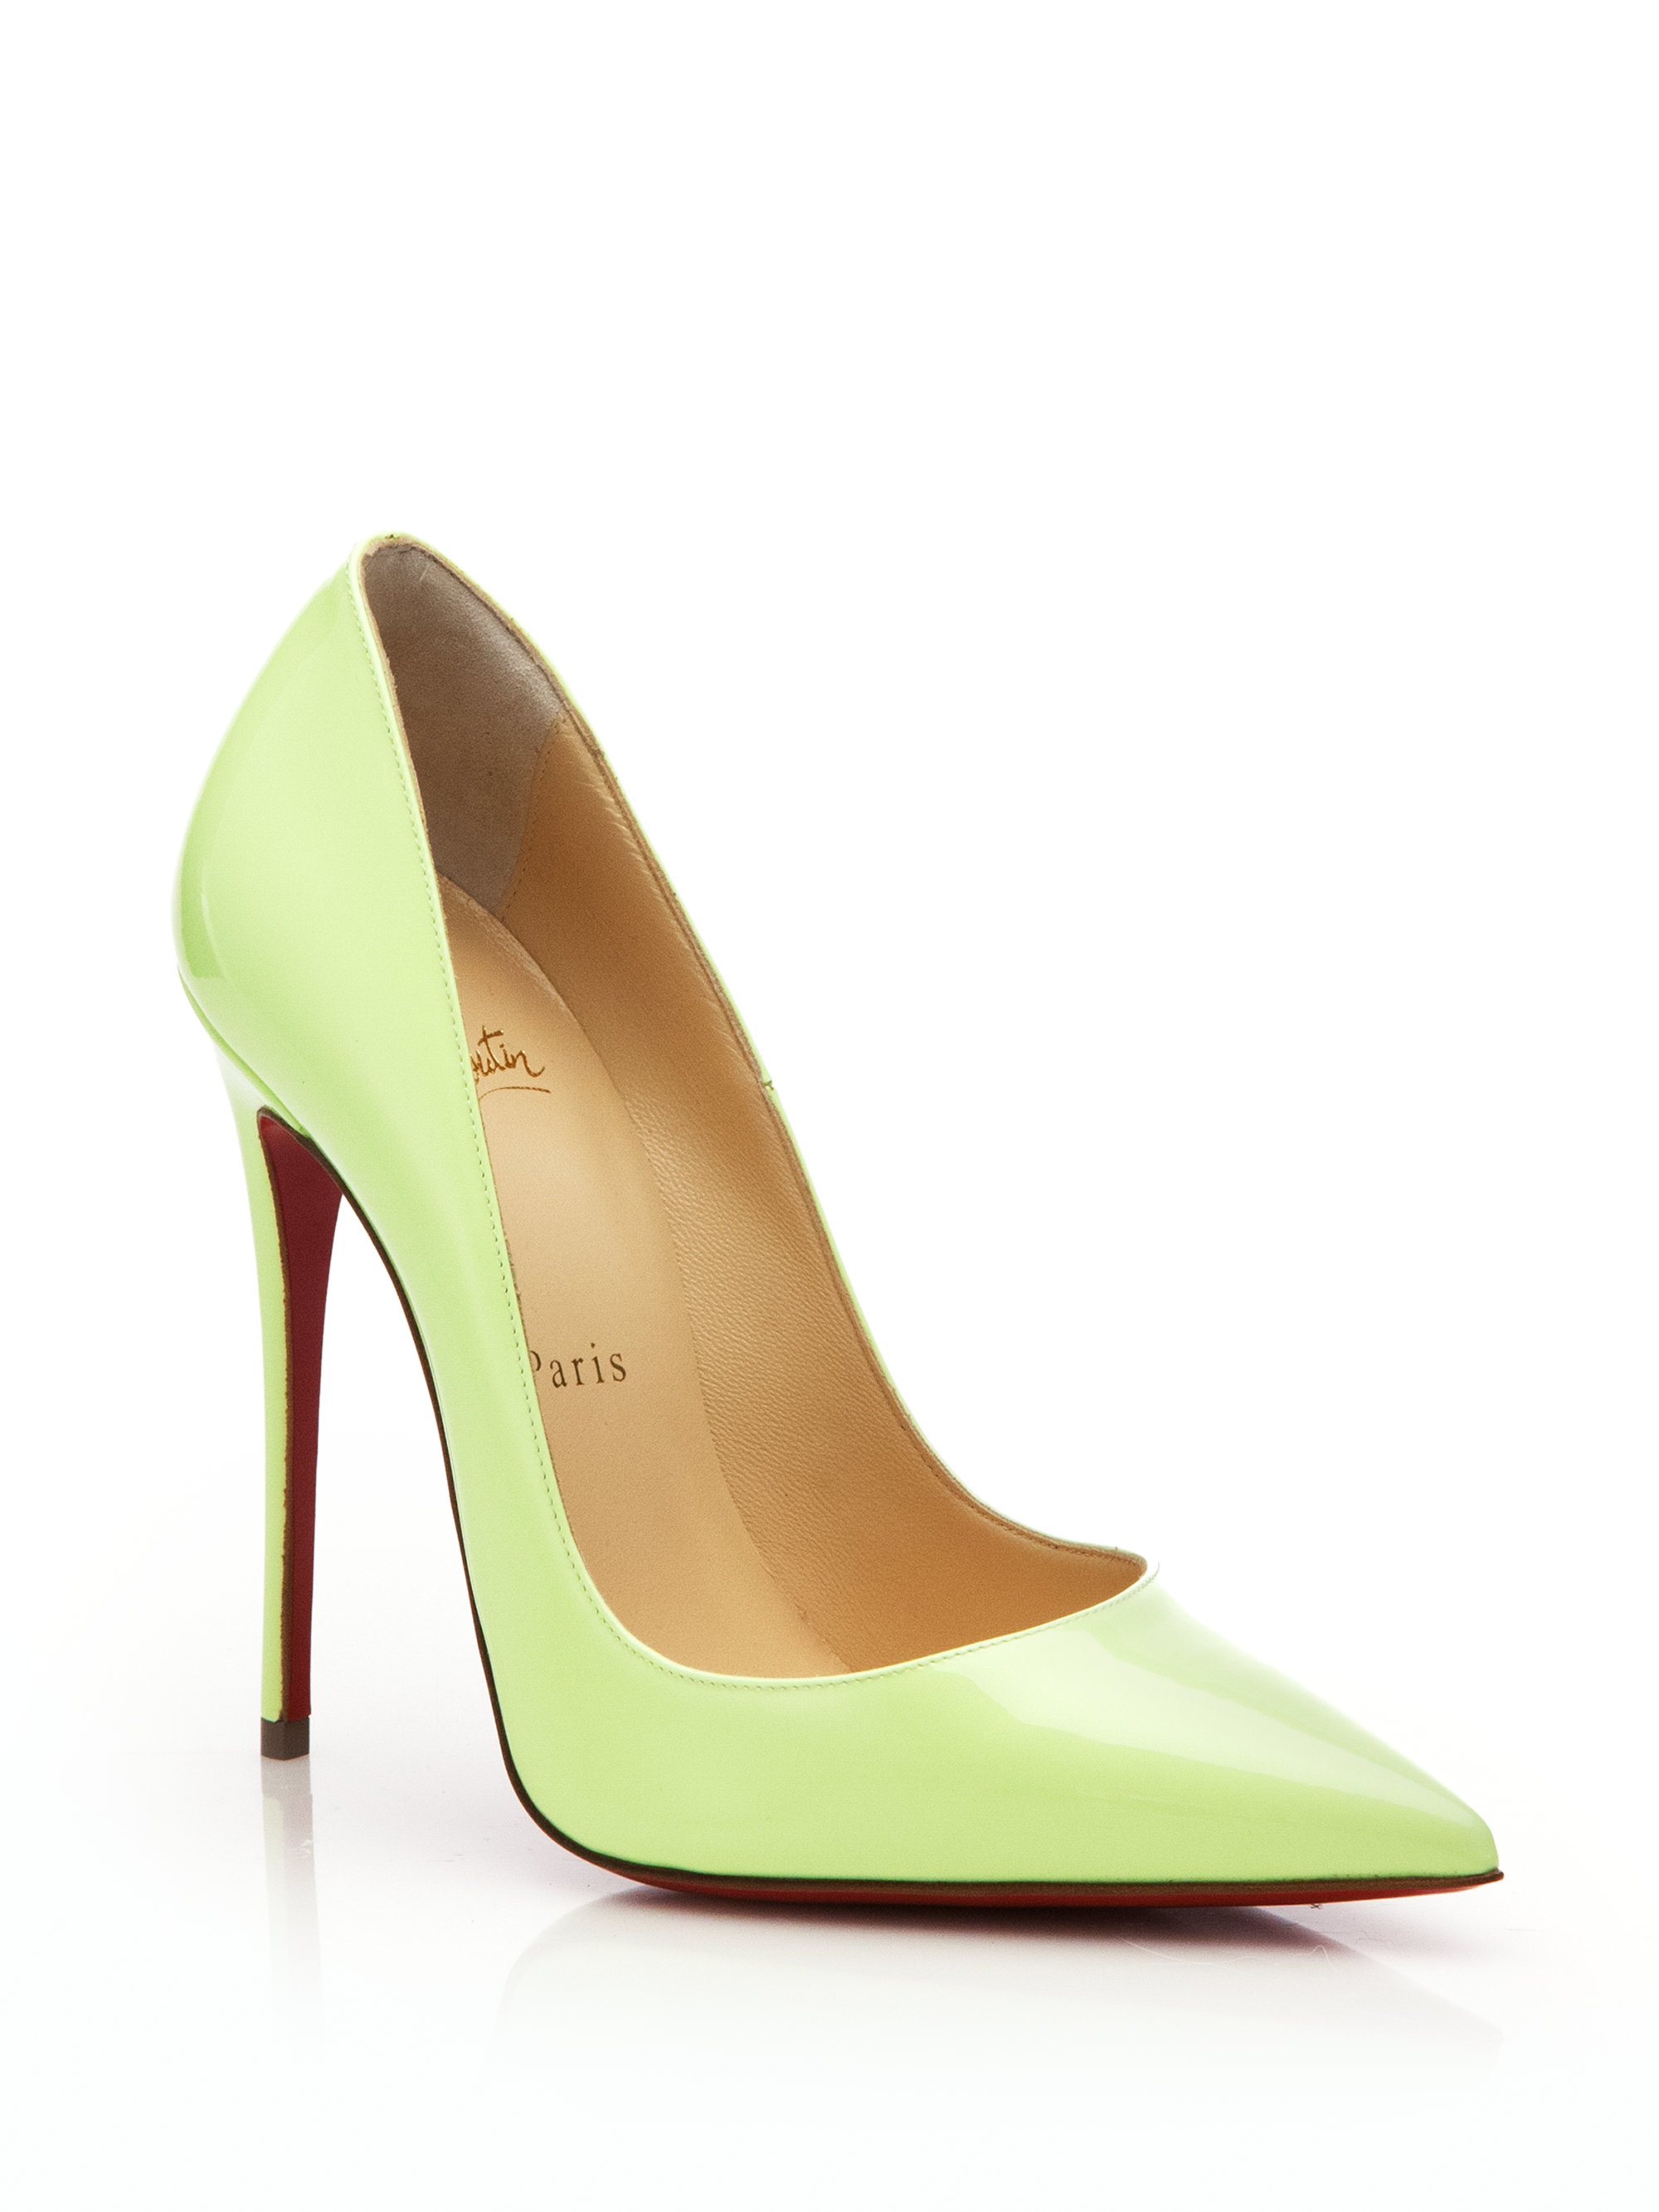 Lyst - Christian Louboutin Patent Leather Point-toe Pumps in Green